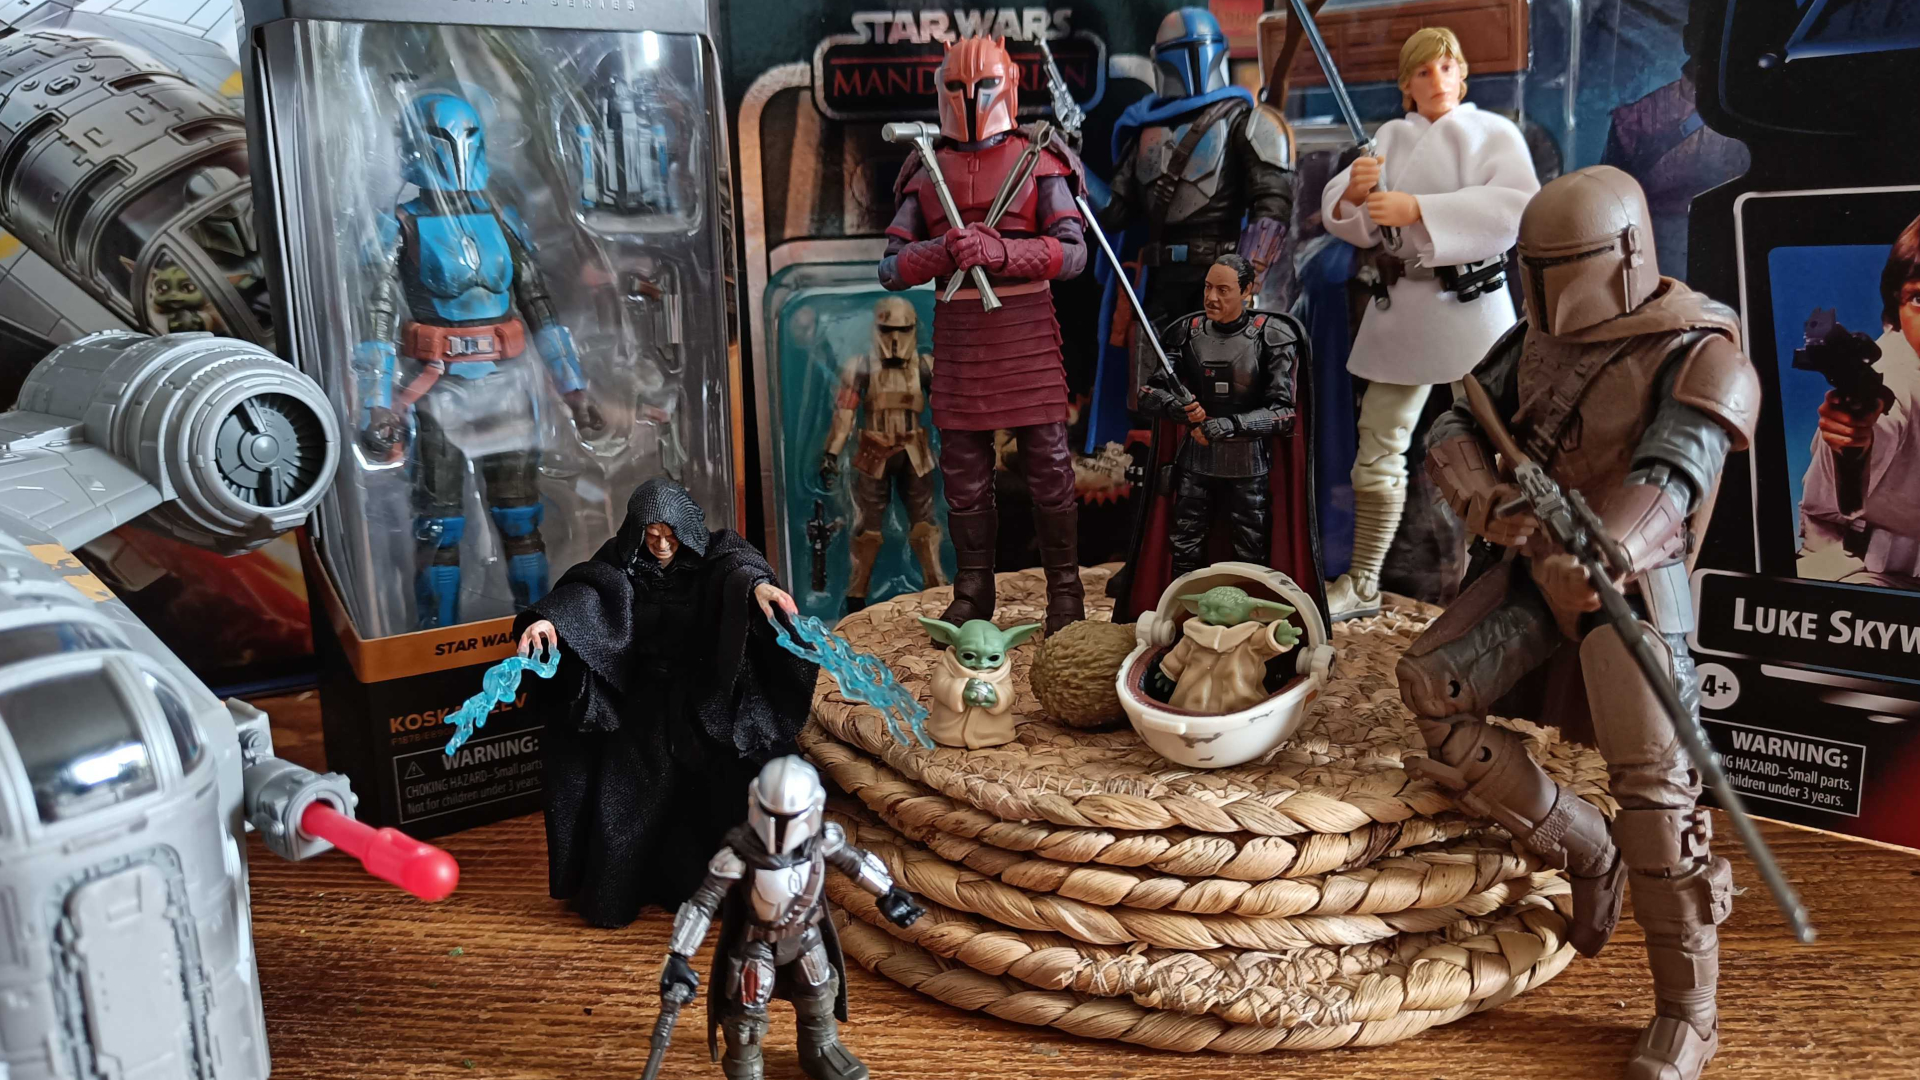 Retro Collecting: A Guide To Vintage Star Wars Figures See more